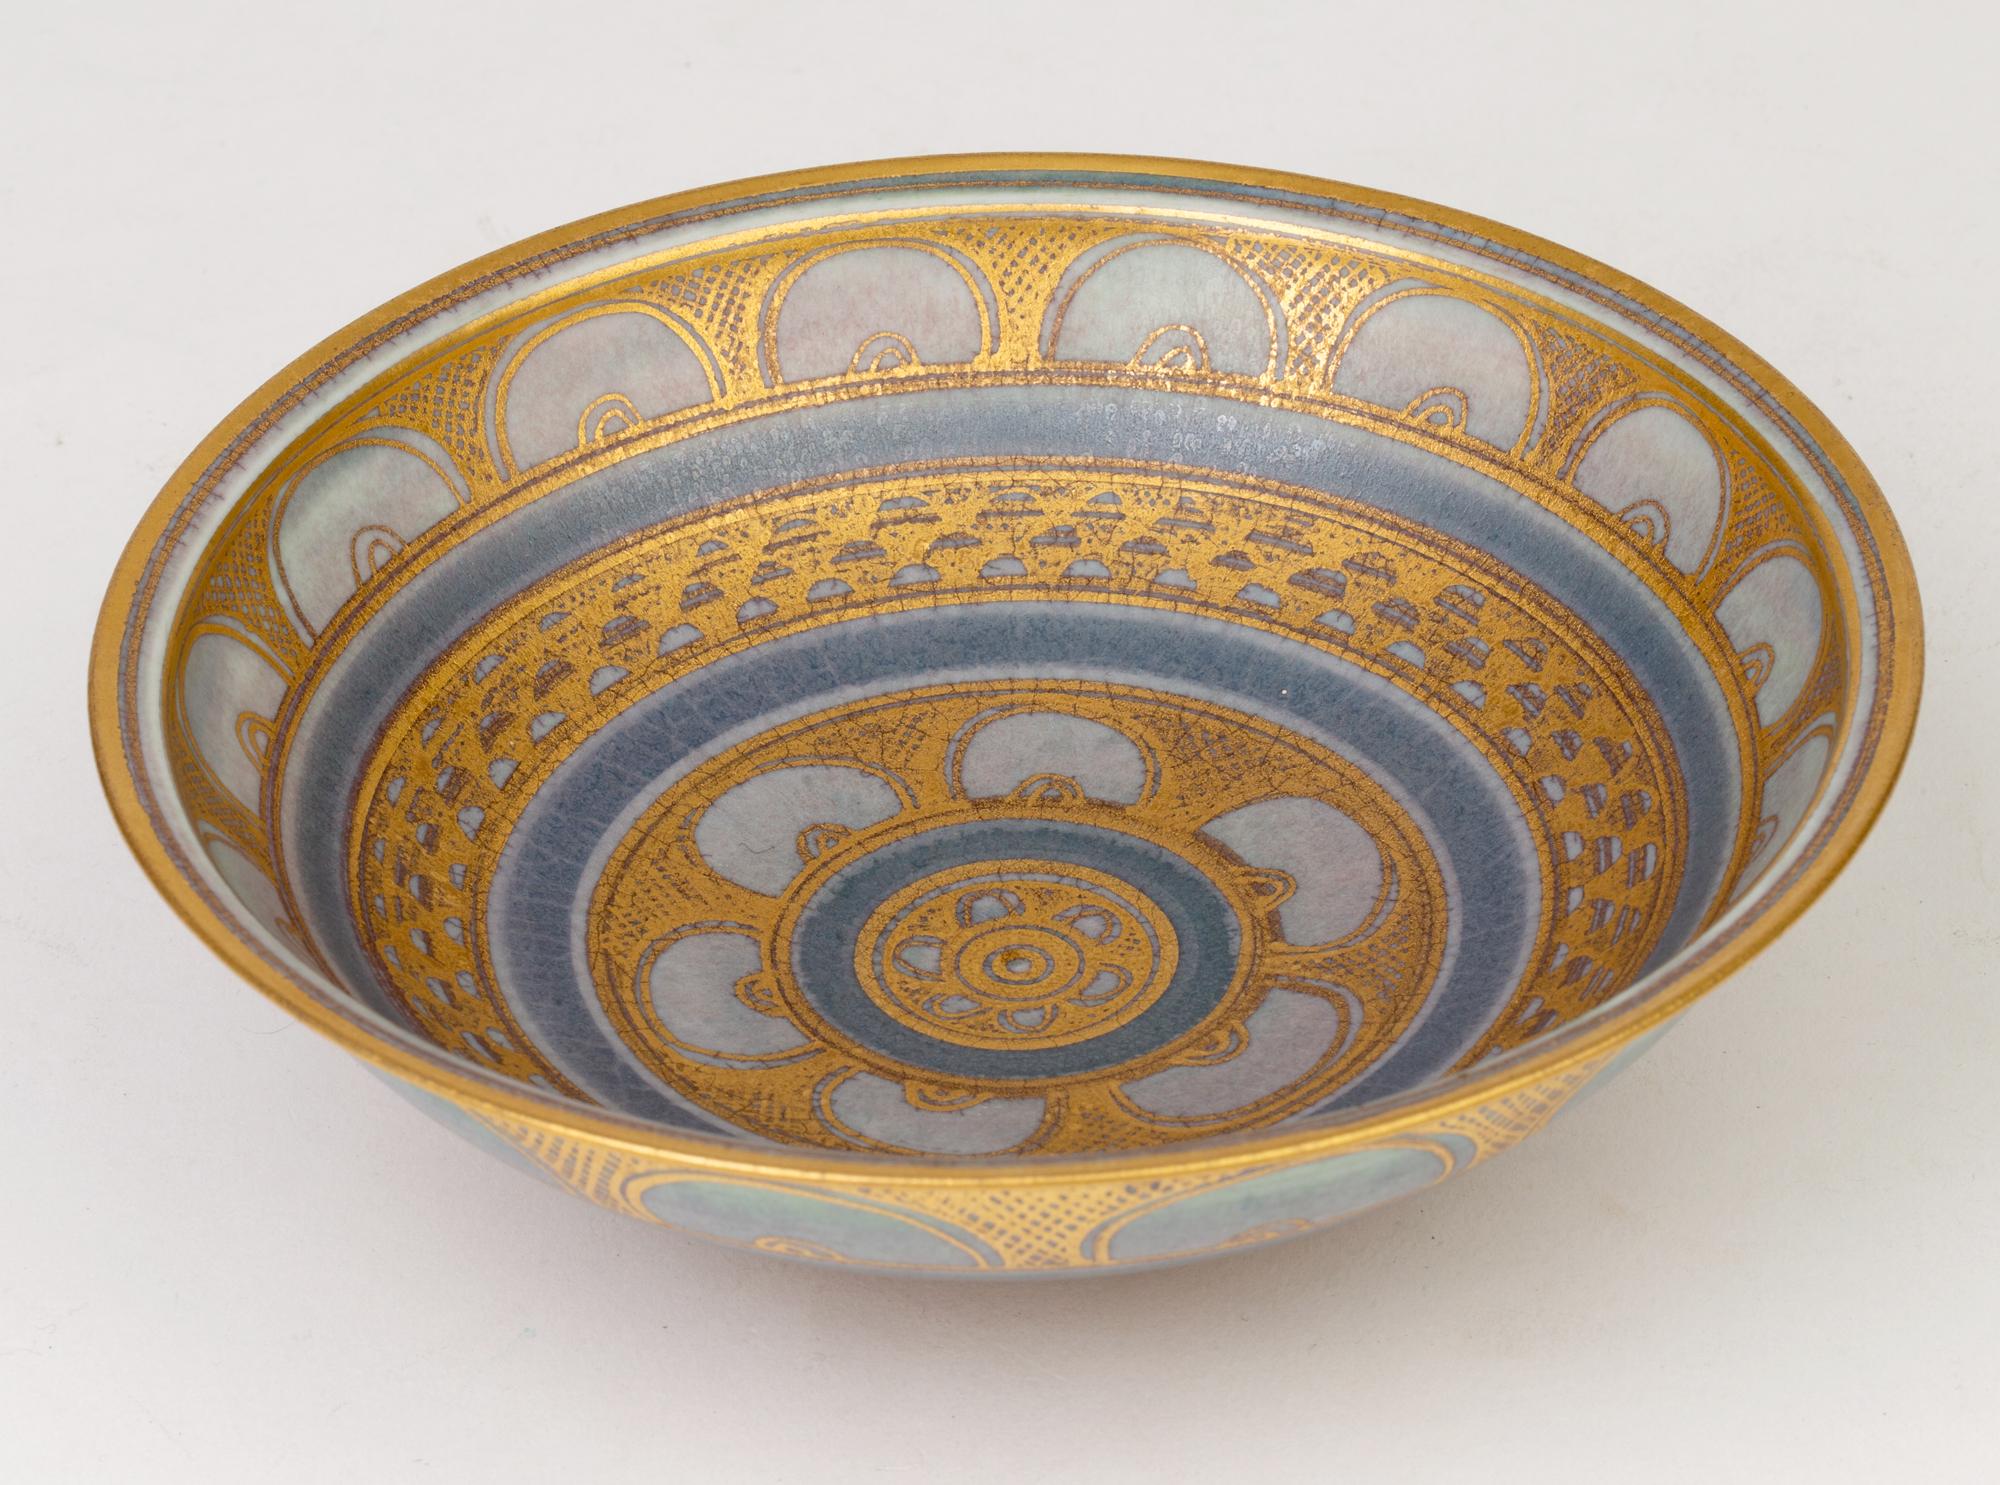 Mary Rich Islamic Influence Gold Lustre Patterned Porcelain Studio Pottery Bowl 1